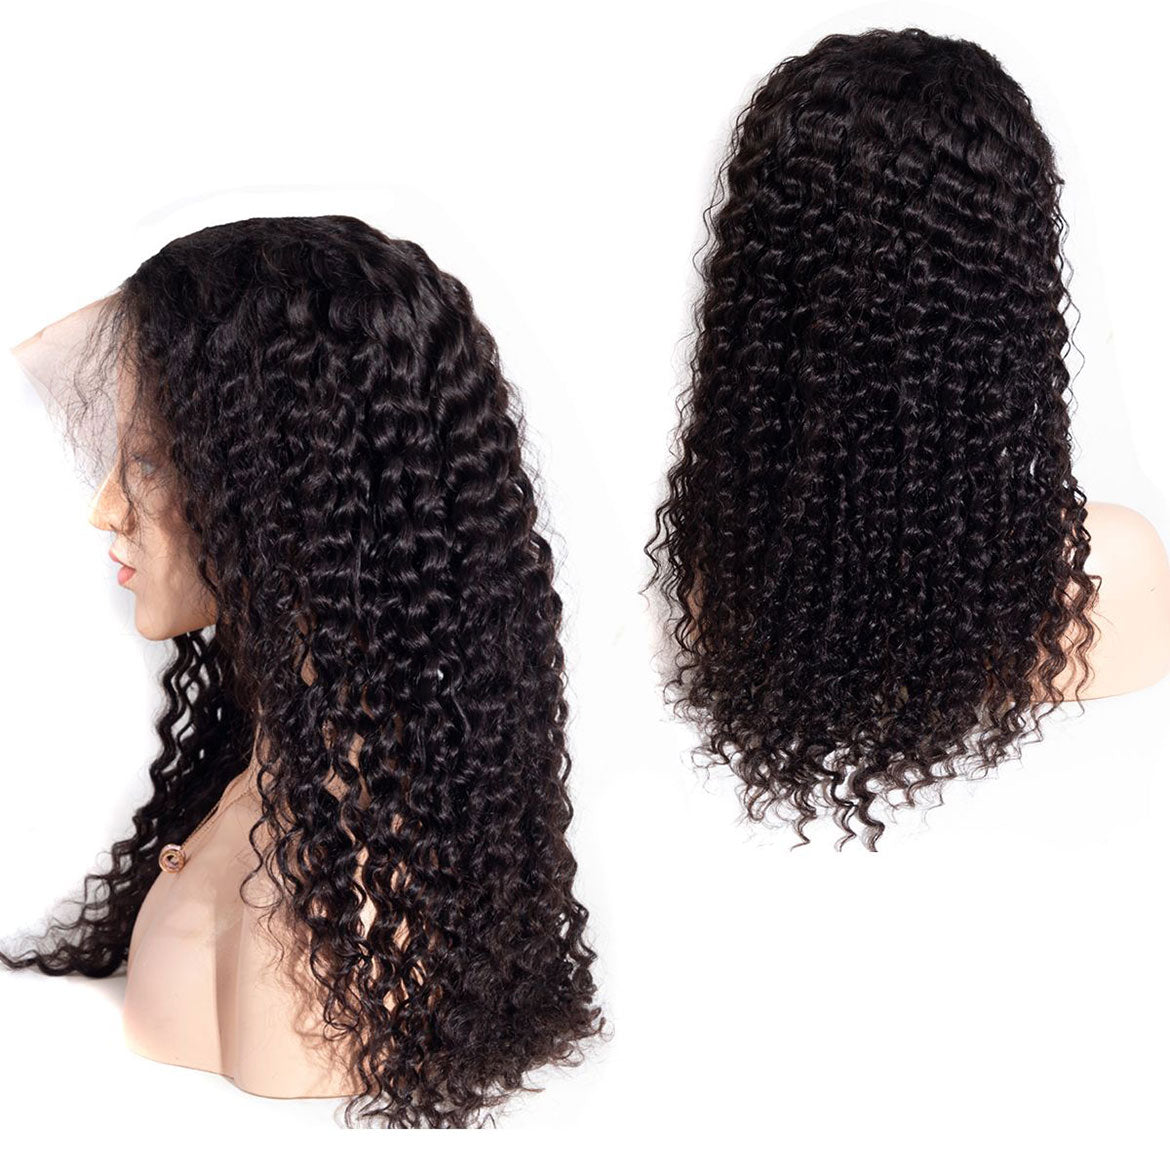 Lace Wigs Human Hair Deep Wave Wigs For Sale